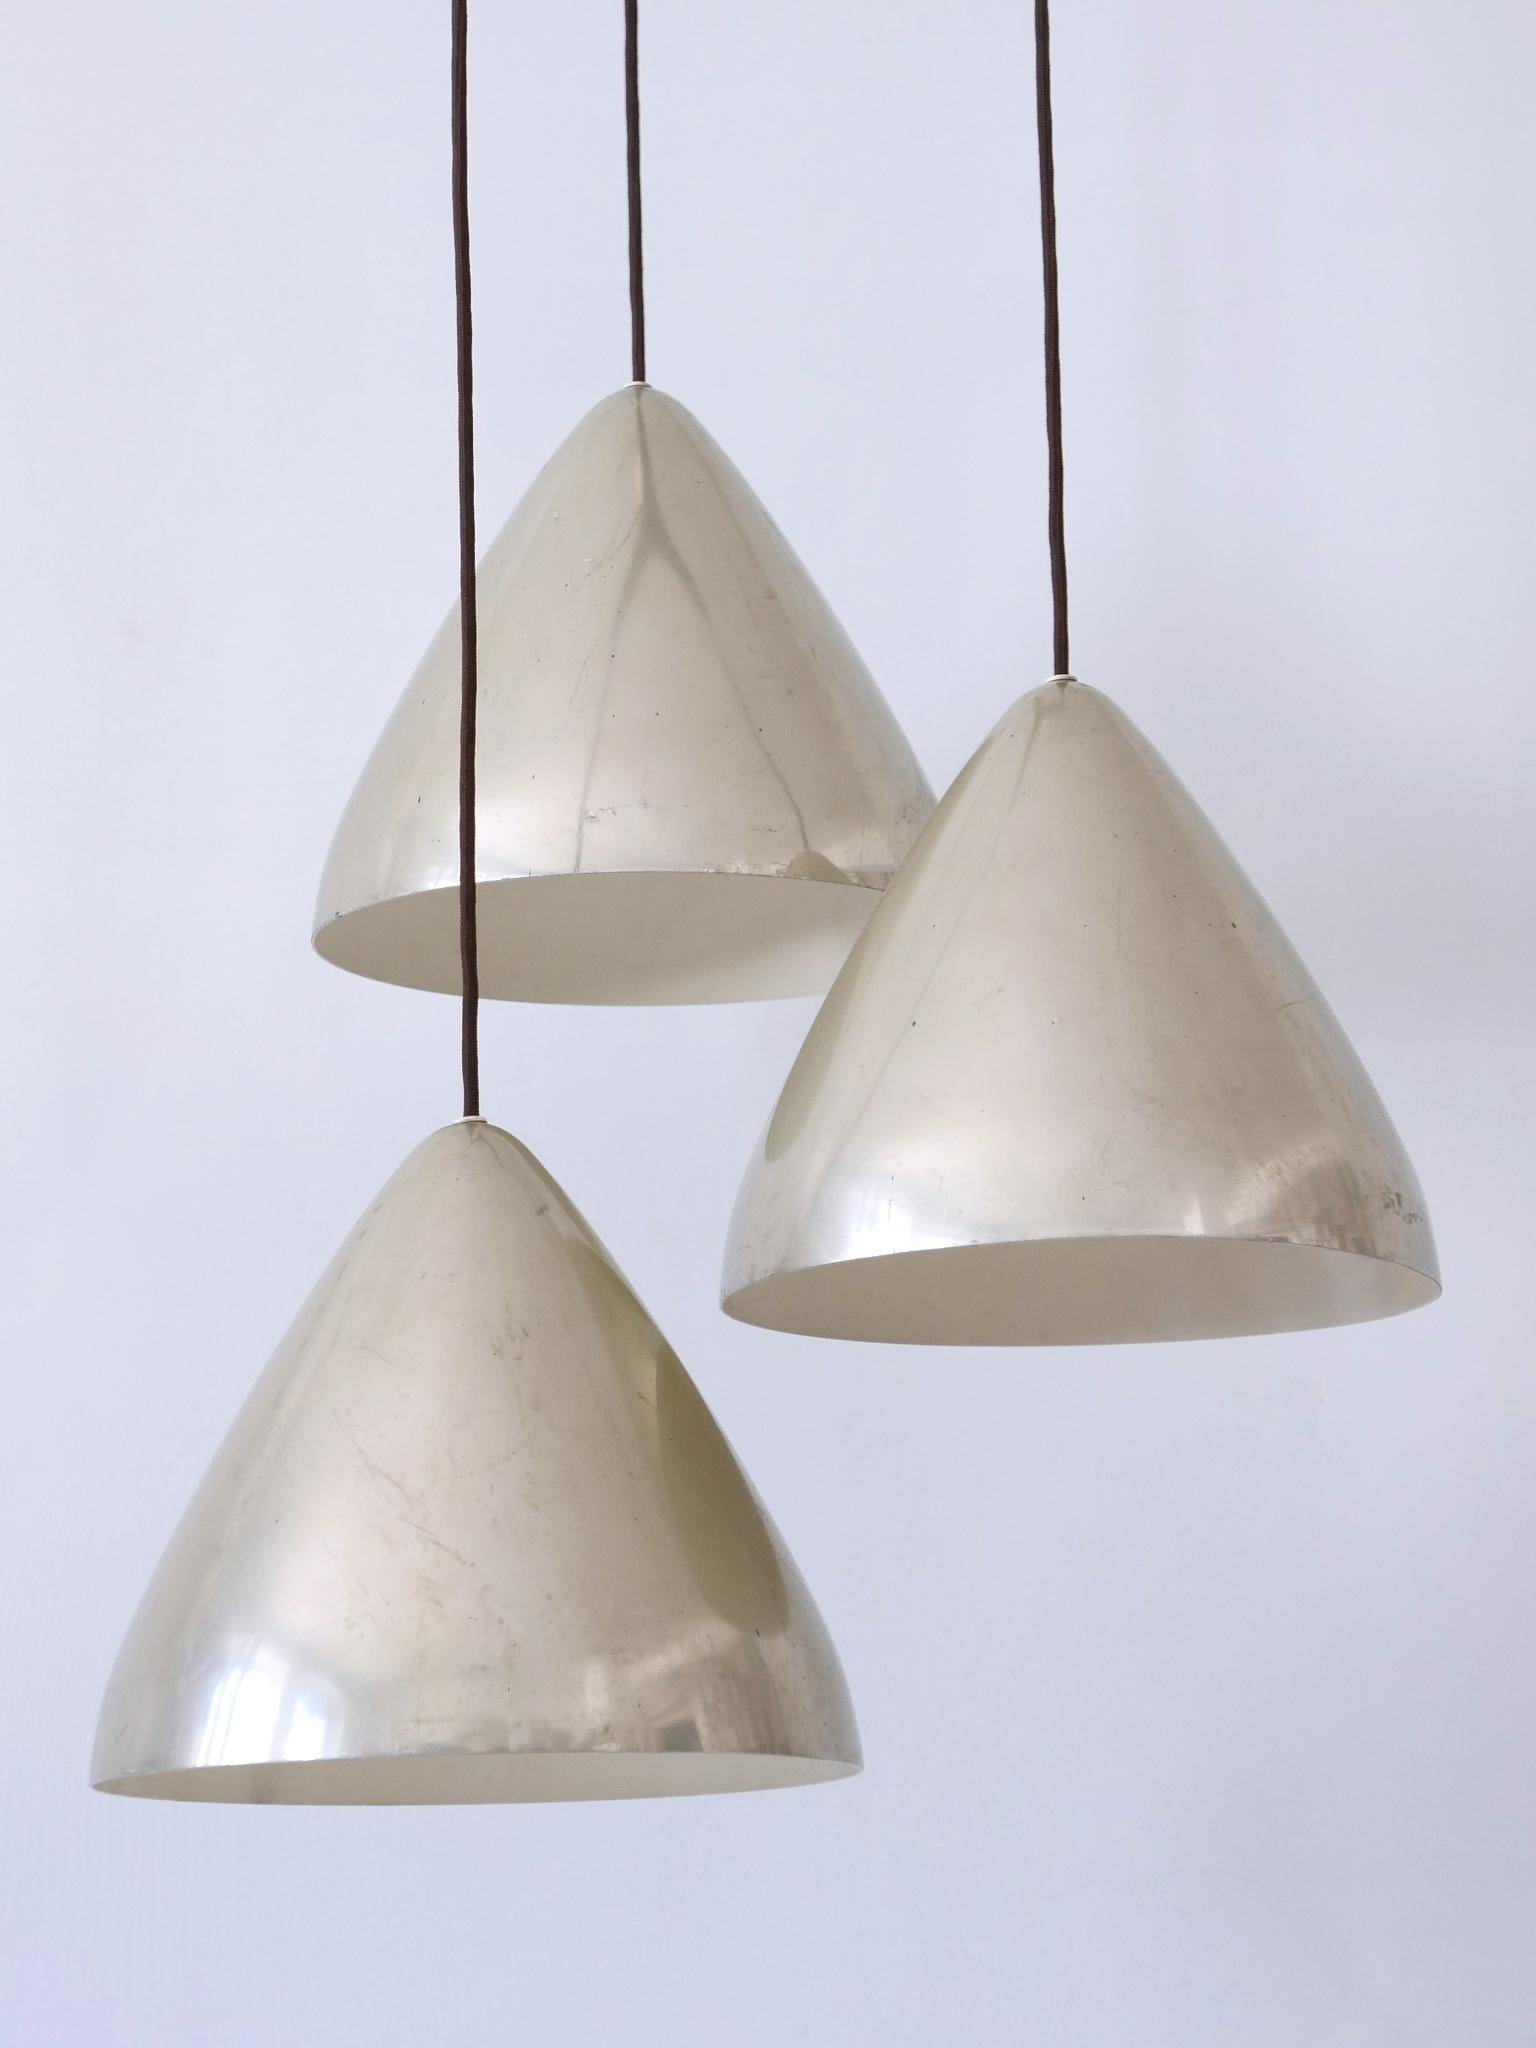 Elegant Cascading Pendant Lamp by Lisa Johansson-Pape for Orno Finland 1960s For Sale 4